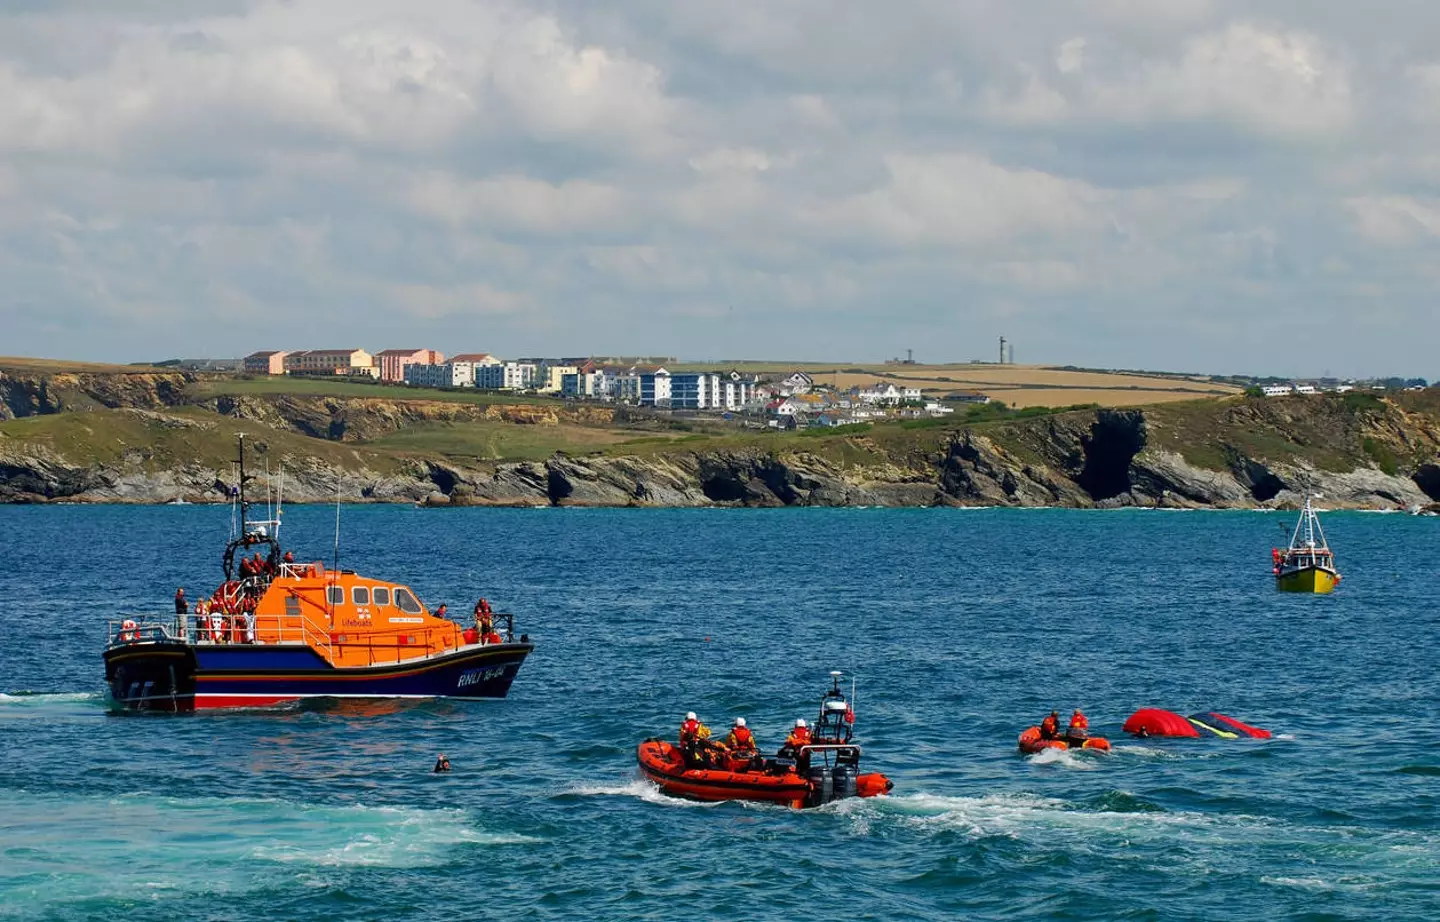 Lifeboat rescuing people off the coast of Newquay, Cornwall.